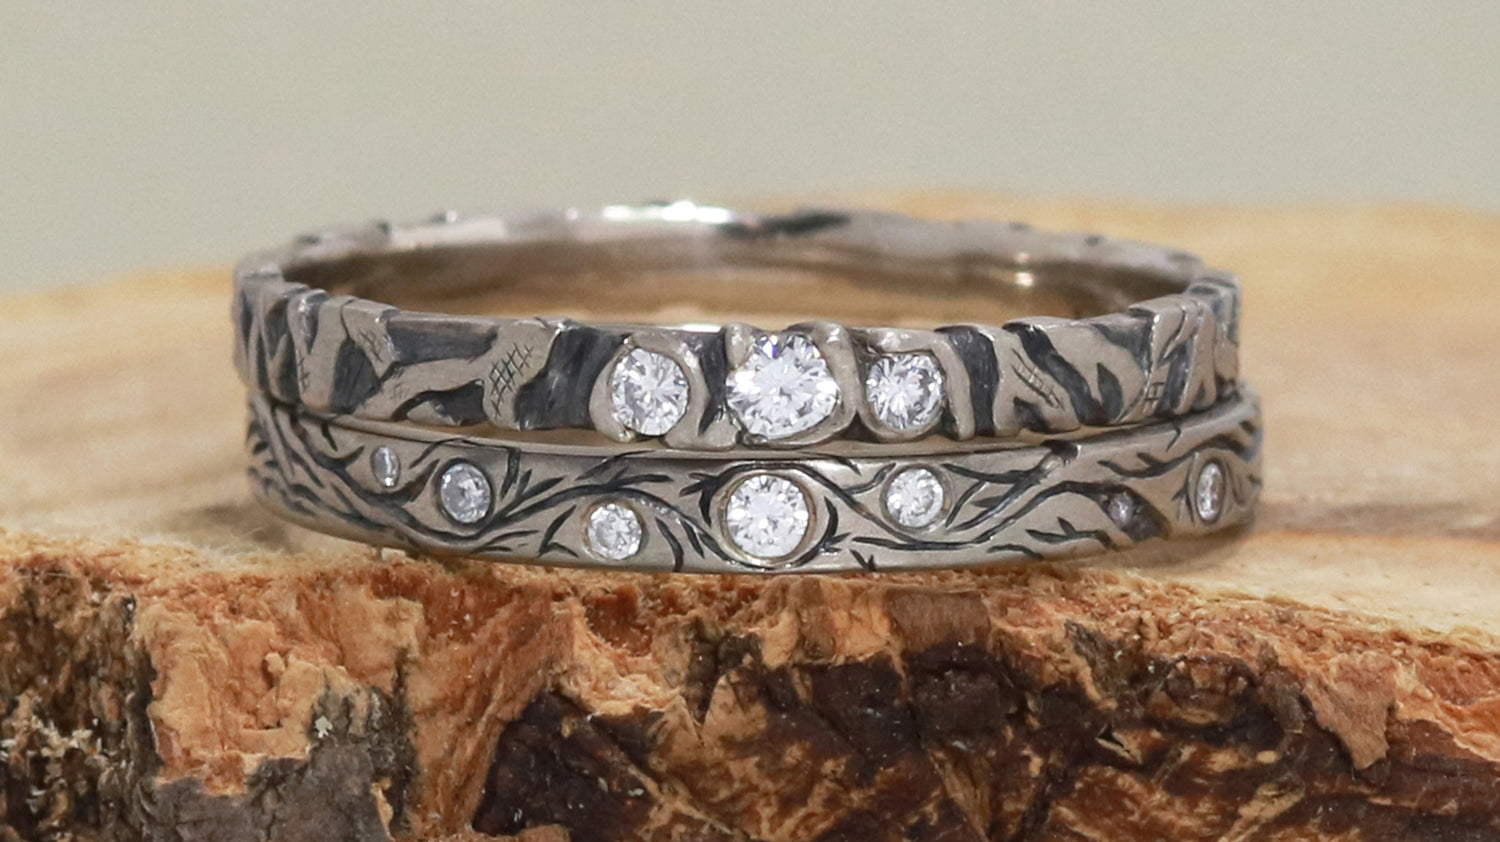 A custom wedding set made from solid 14k white gold and diamonds with hand carved vines and tree branches going around the entire ring. Inspired by nature and very organic.